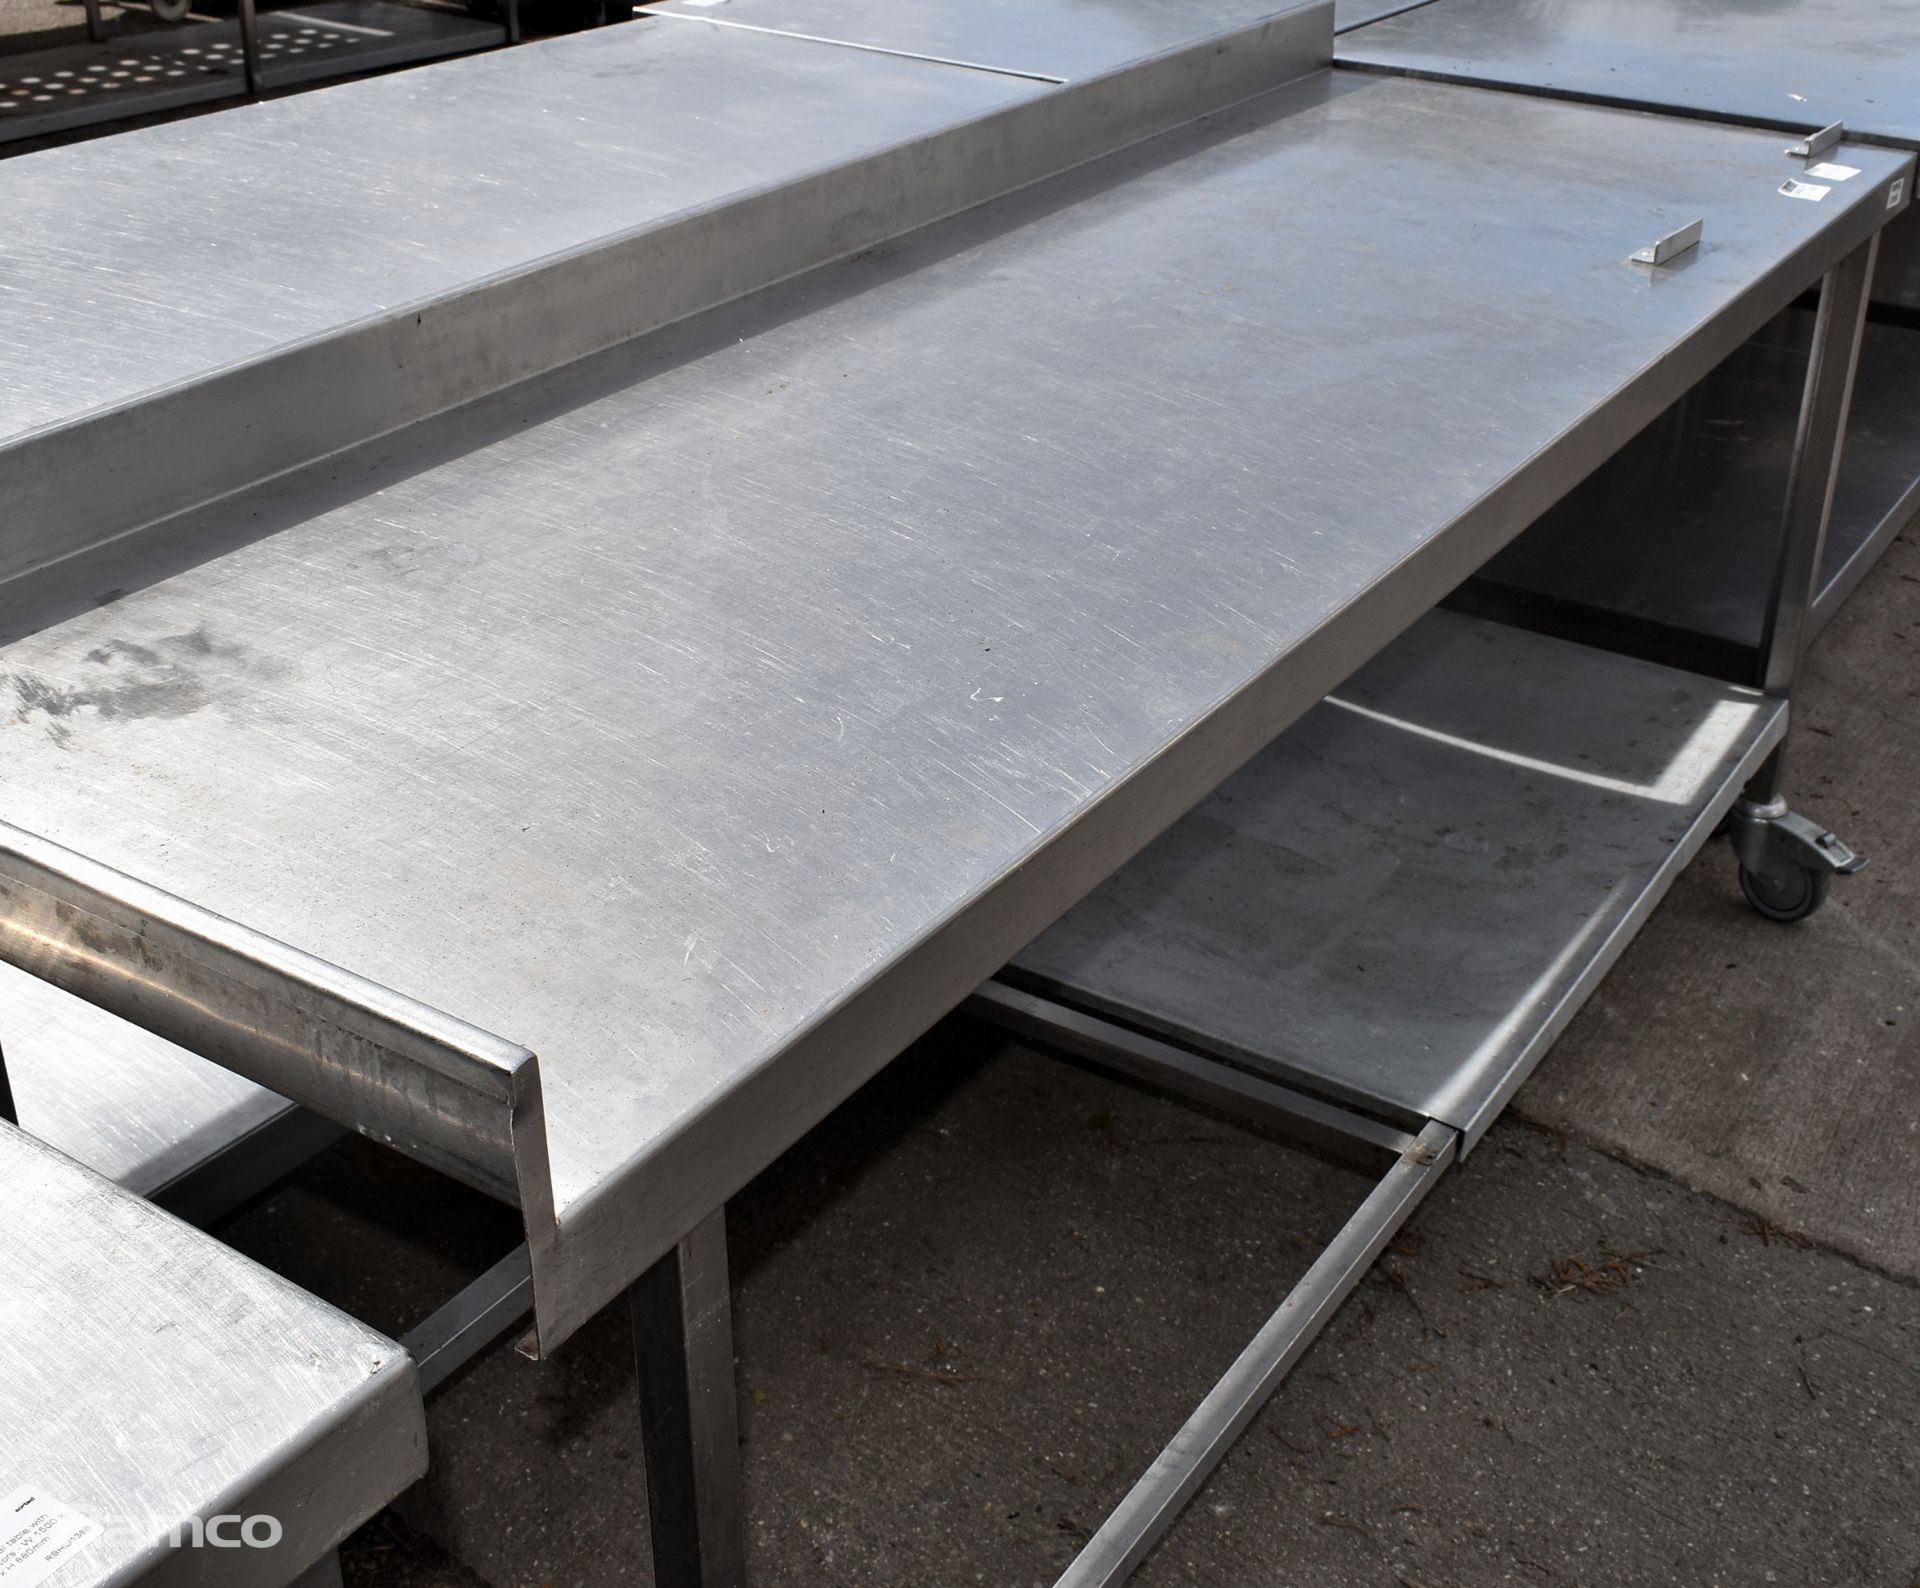 Stainless steel table with splashback on castors - W 1940 x D 700 x H 920mm - Image 3 of 3